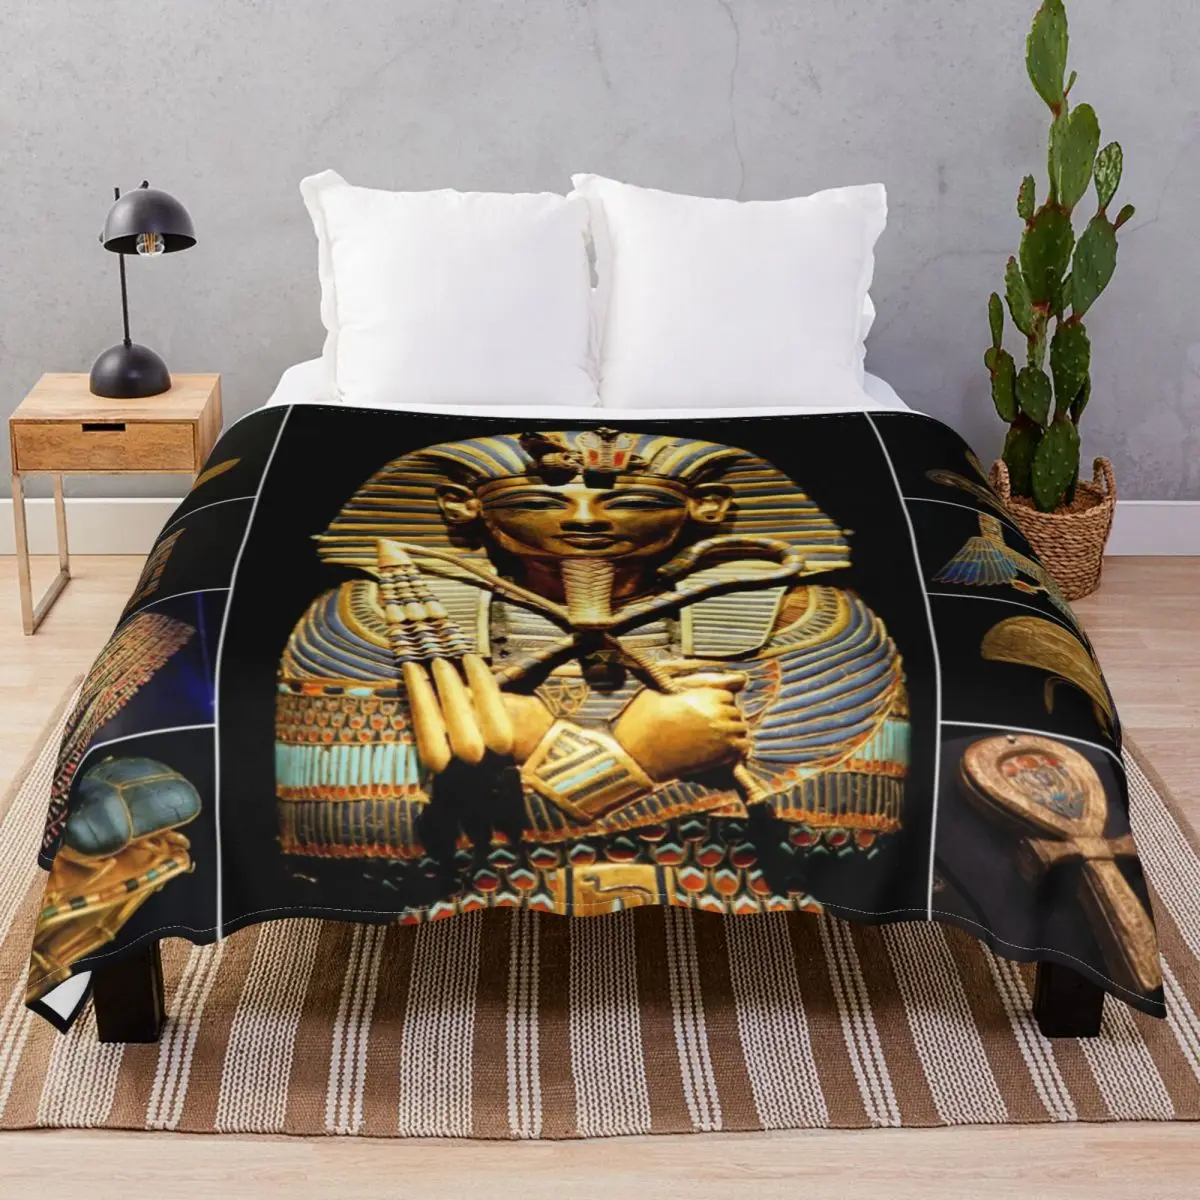 King Tutankhamun Artifacts Blanket Fleece Plush Print Super Soft Throw Blankets for Bed Home Couch Camp Office